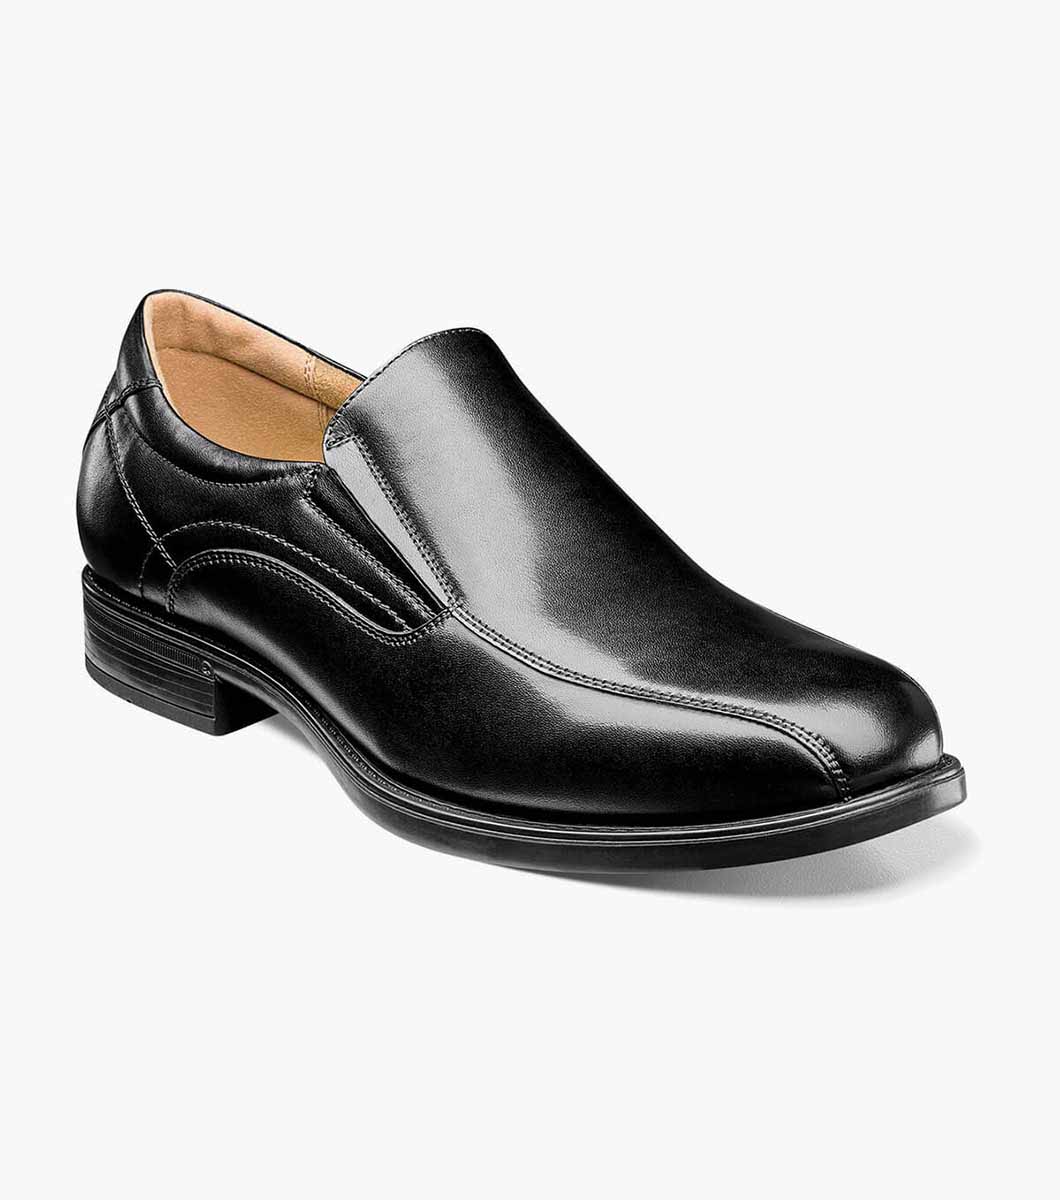 Men's Slip On Dress Shoes Bicycle Toes and Frontal Stitching Line 